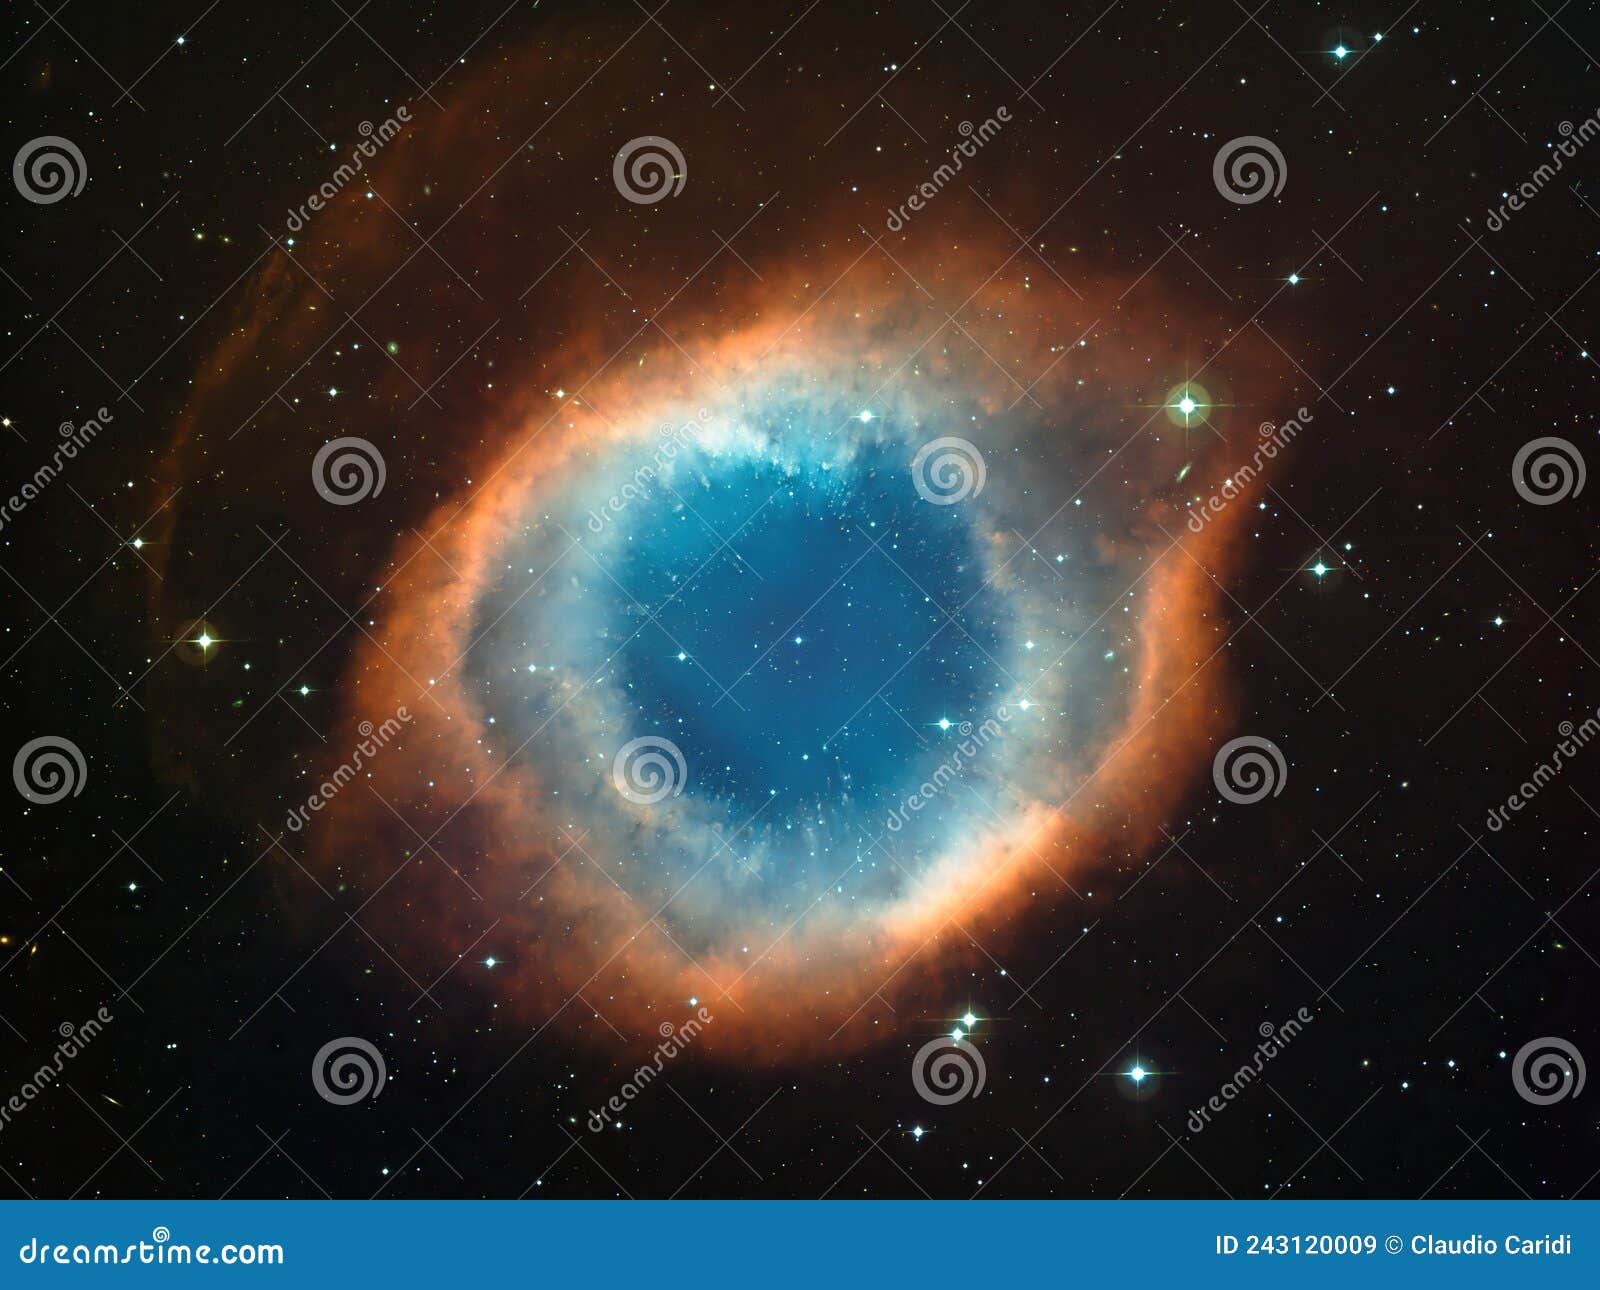 planetary nebula helix ngc 7293. s of this picture furnished by eso